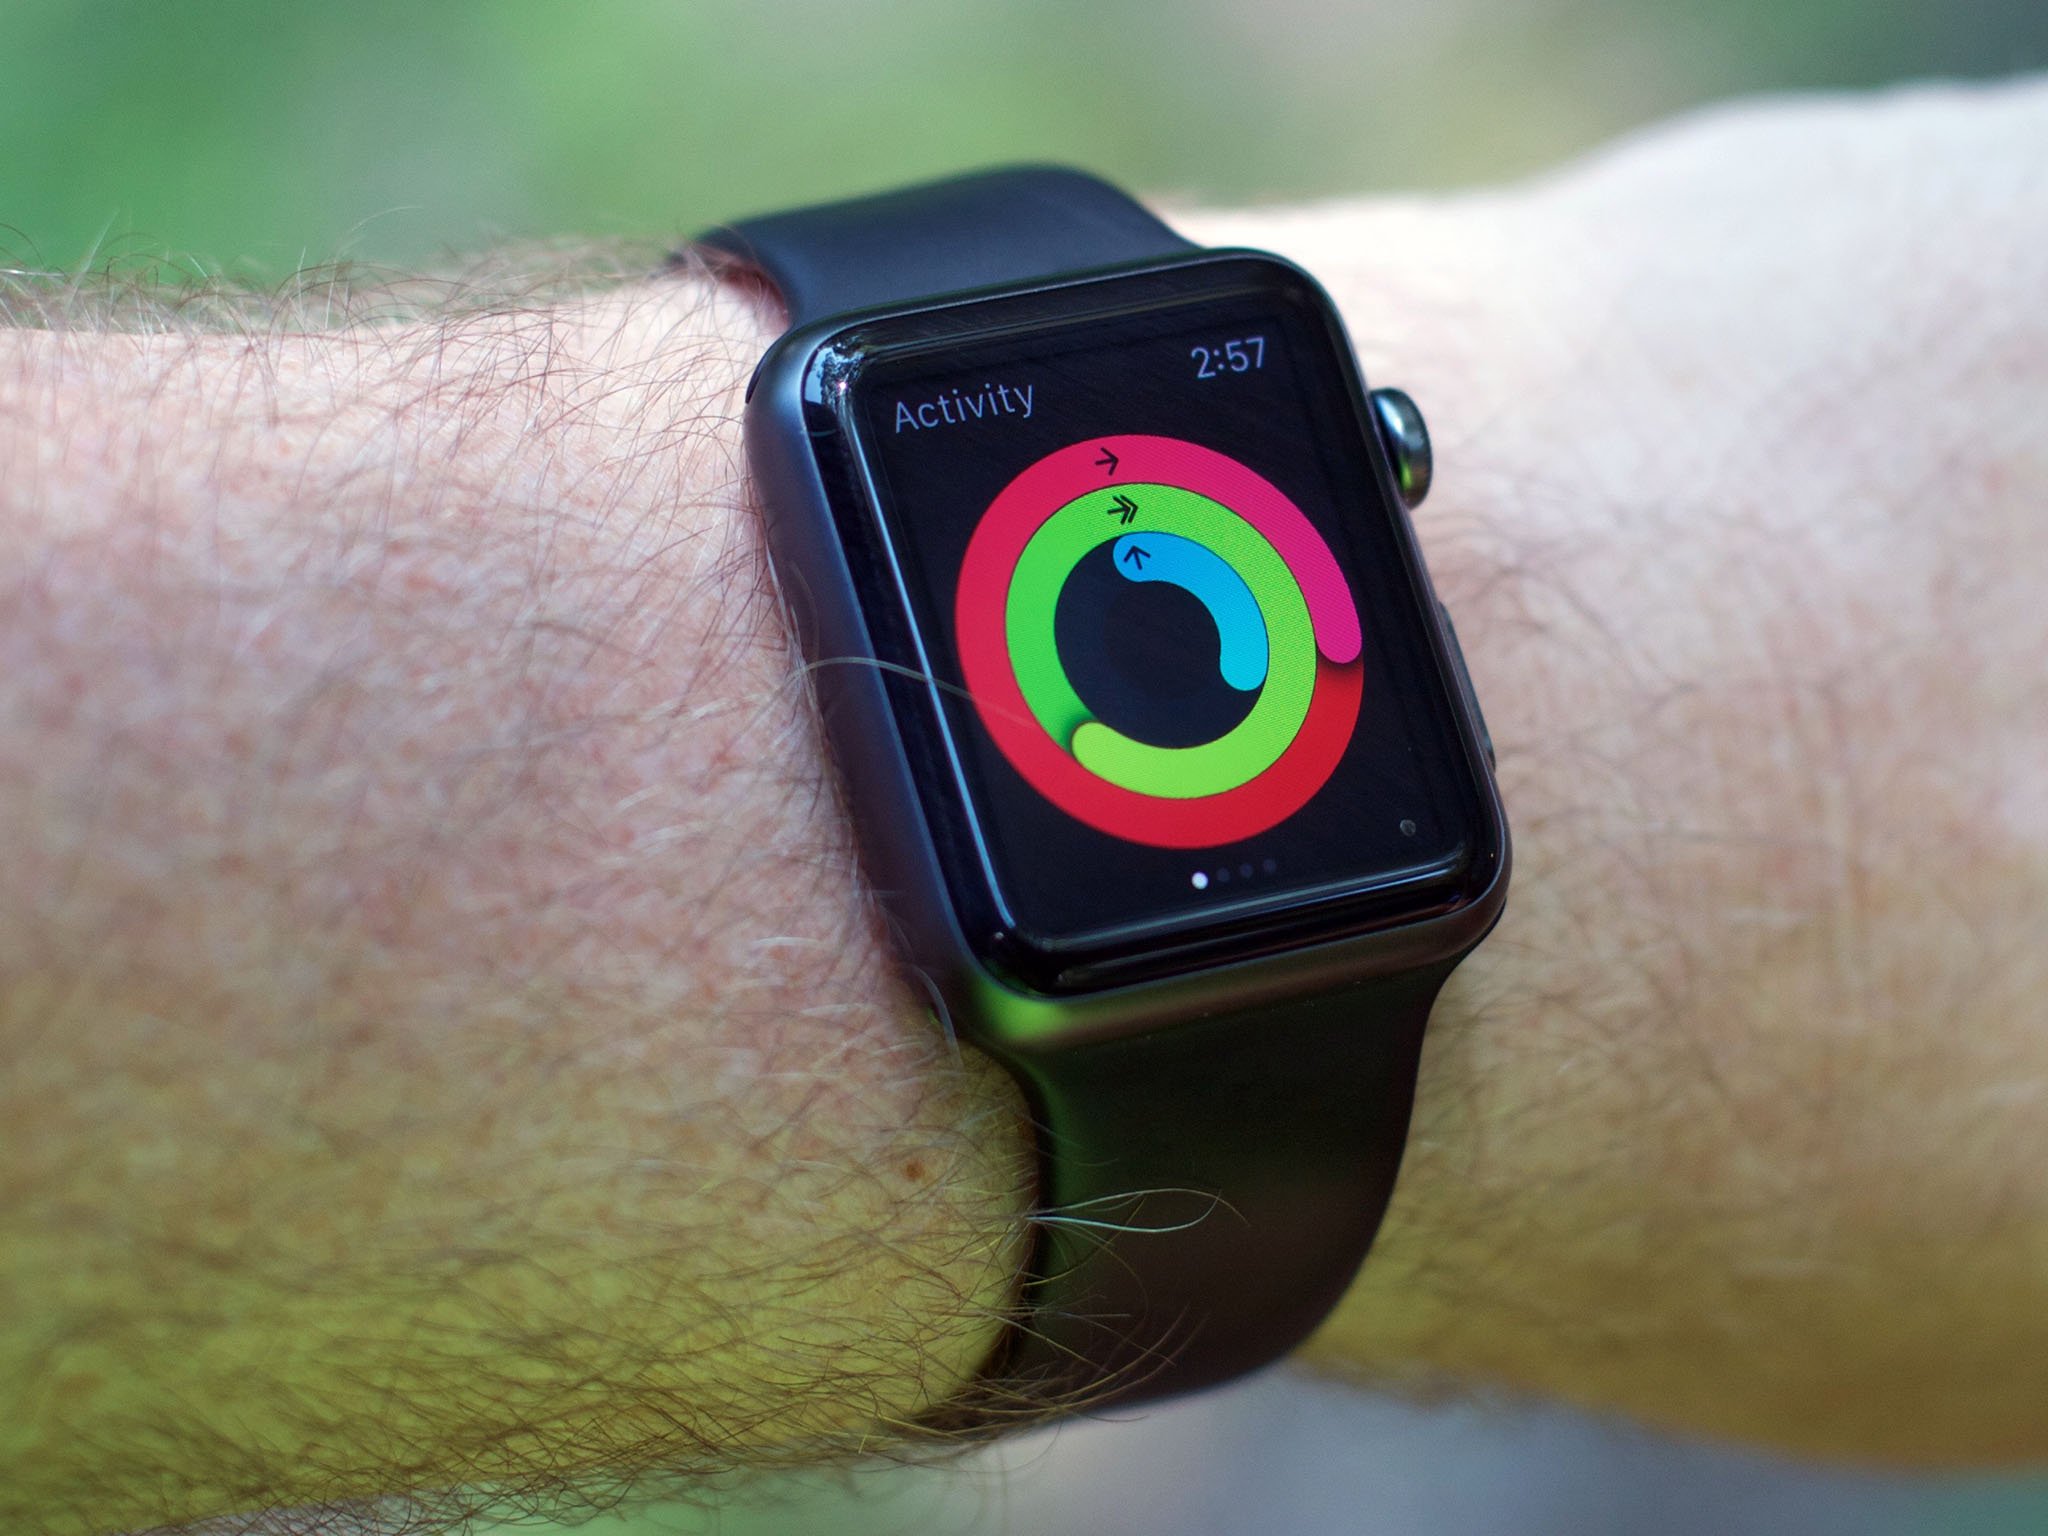 Apple said to be looking to bring Apple Watch to Aetna insurance customers